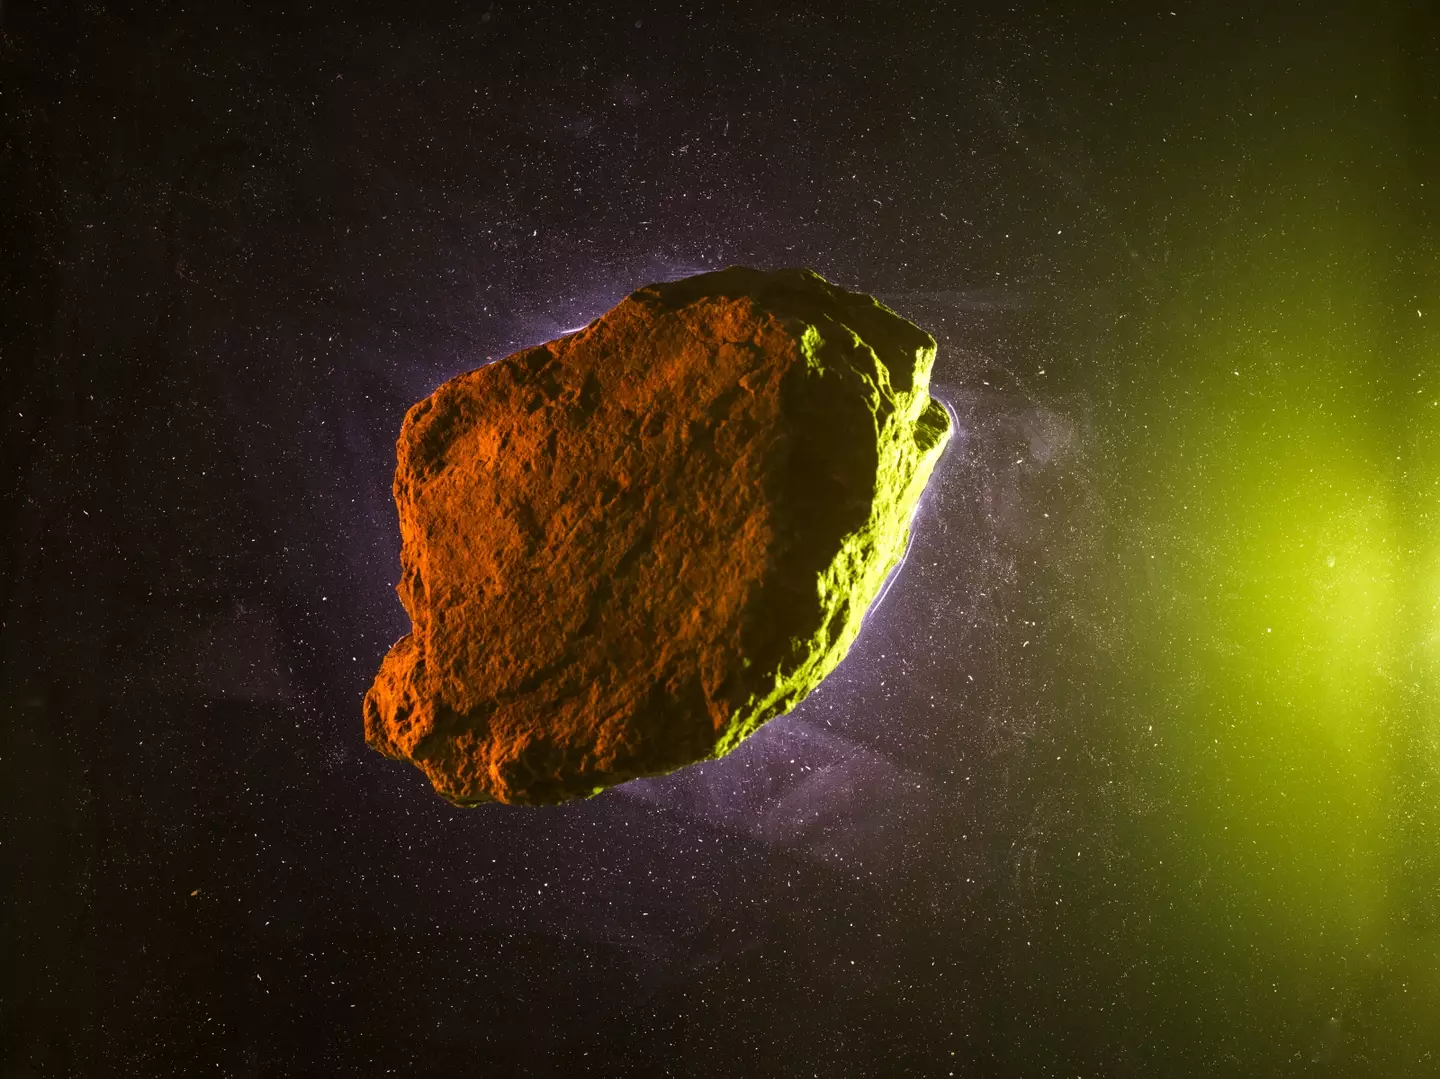 We could learn a lot from this massive asteroid.